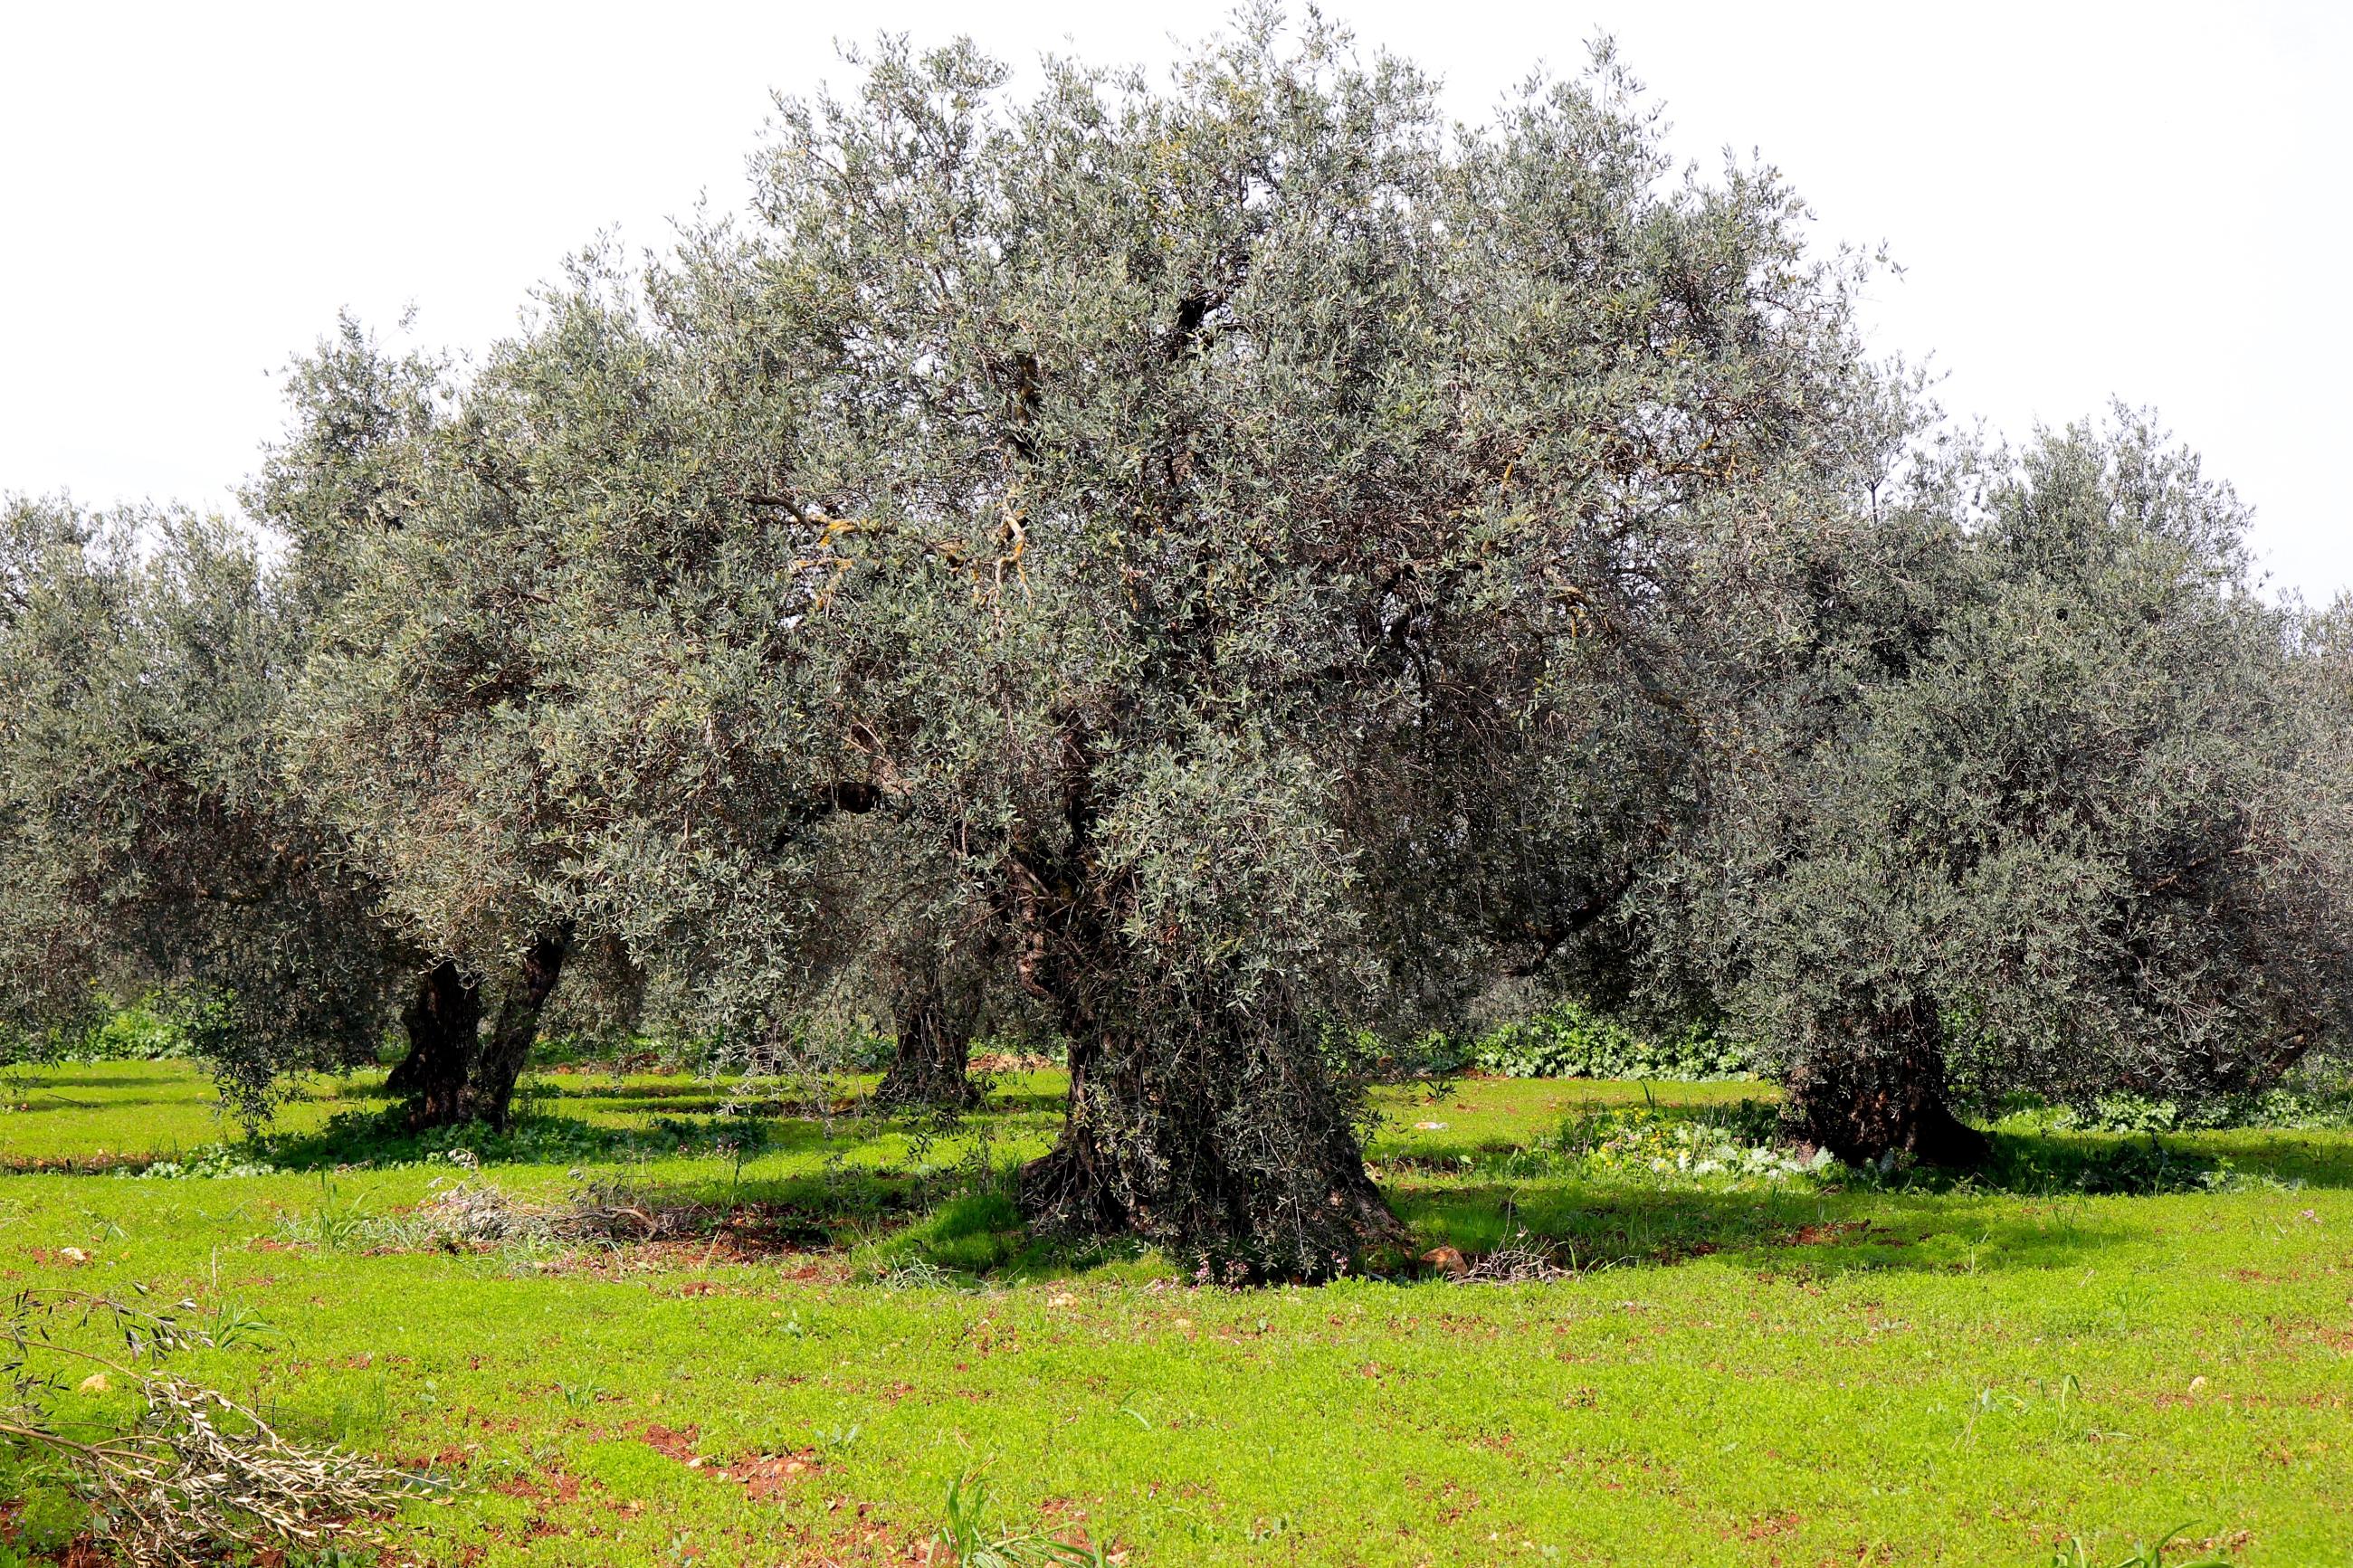  A beautiful, massive olive tree in Palestine, centered in the frame with more olive trees behind it. The grass beneath the trees is a bright green.